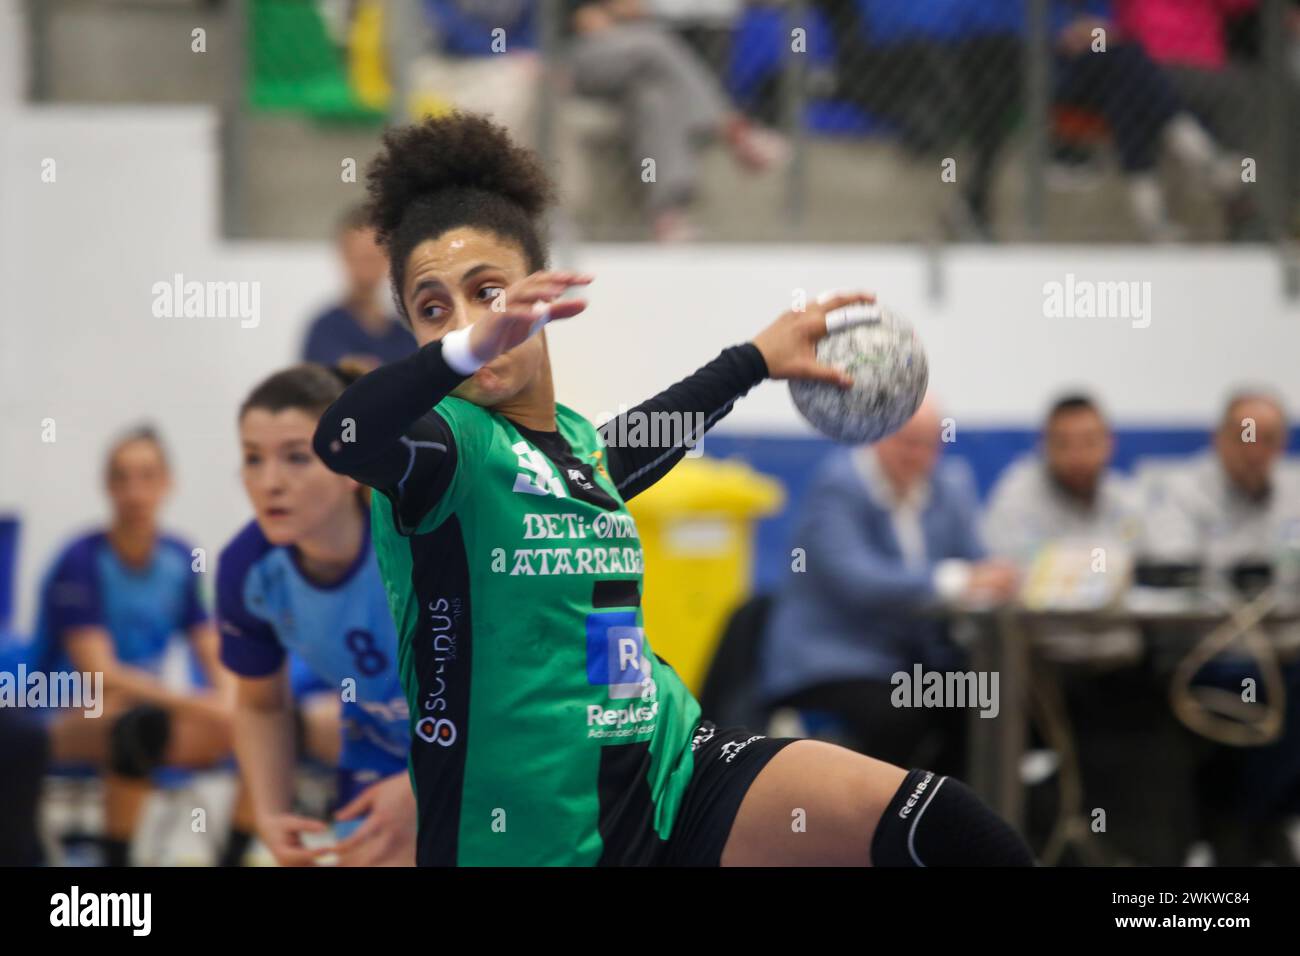 Oviedo, Spain, 22th February 2024: Replasa Beti-Onak player, Mariana Costa (98) throws a seven meter during the 19th Matchday of the Liga Guerreras Iberdrola 2023-24 between Lobas Global Atac Oviedo and Replasa Beti-Onak, on February 22, 2023, at the Florida Arena Municipal Sports Center, in Oviedo, Spain. Credit: Alberto Brevers / Alamy Live News. Stock Photo